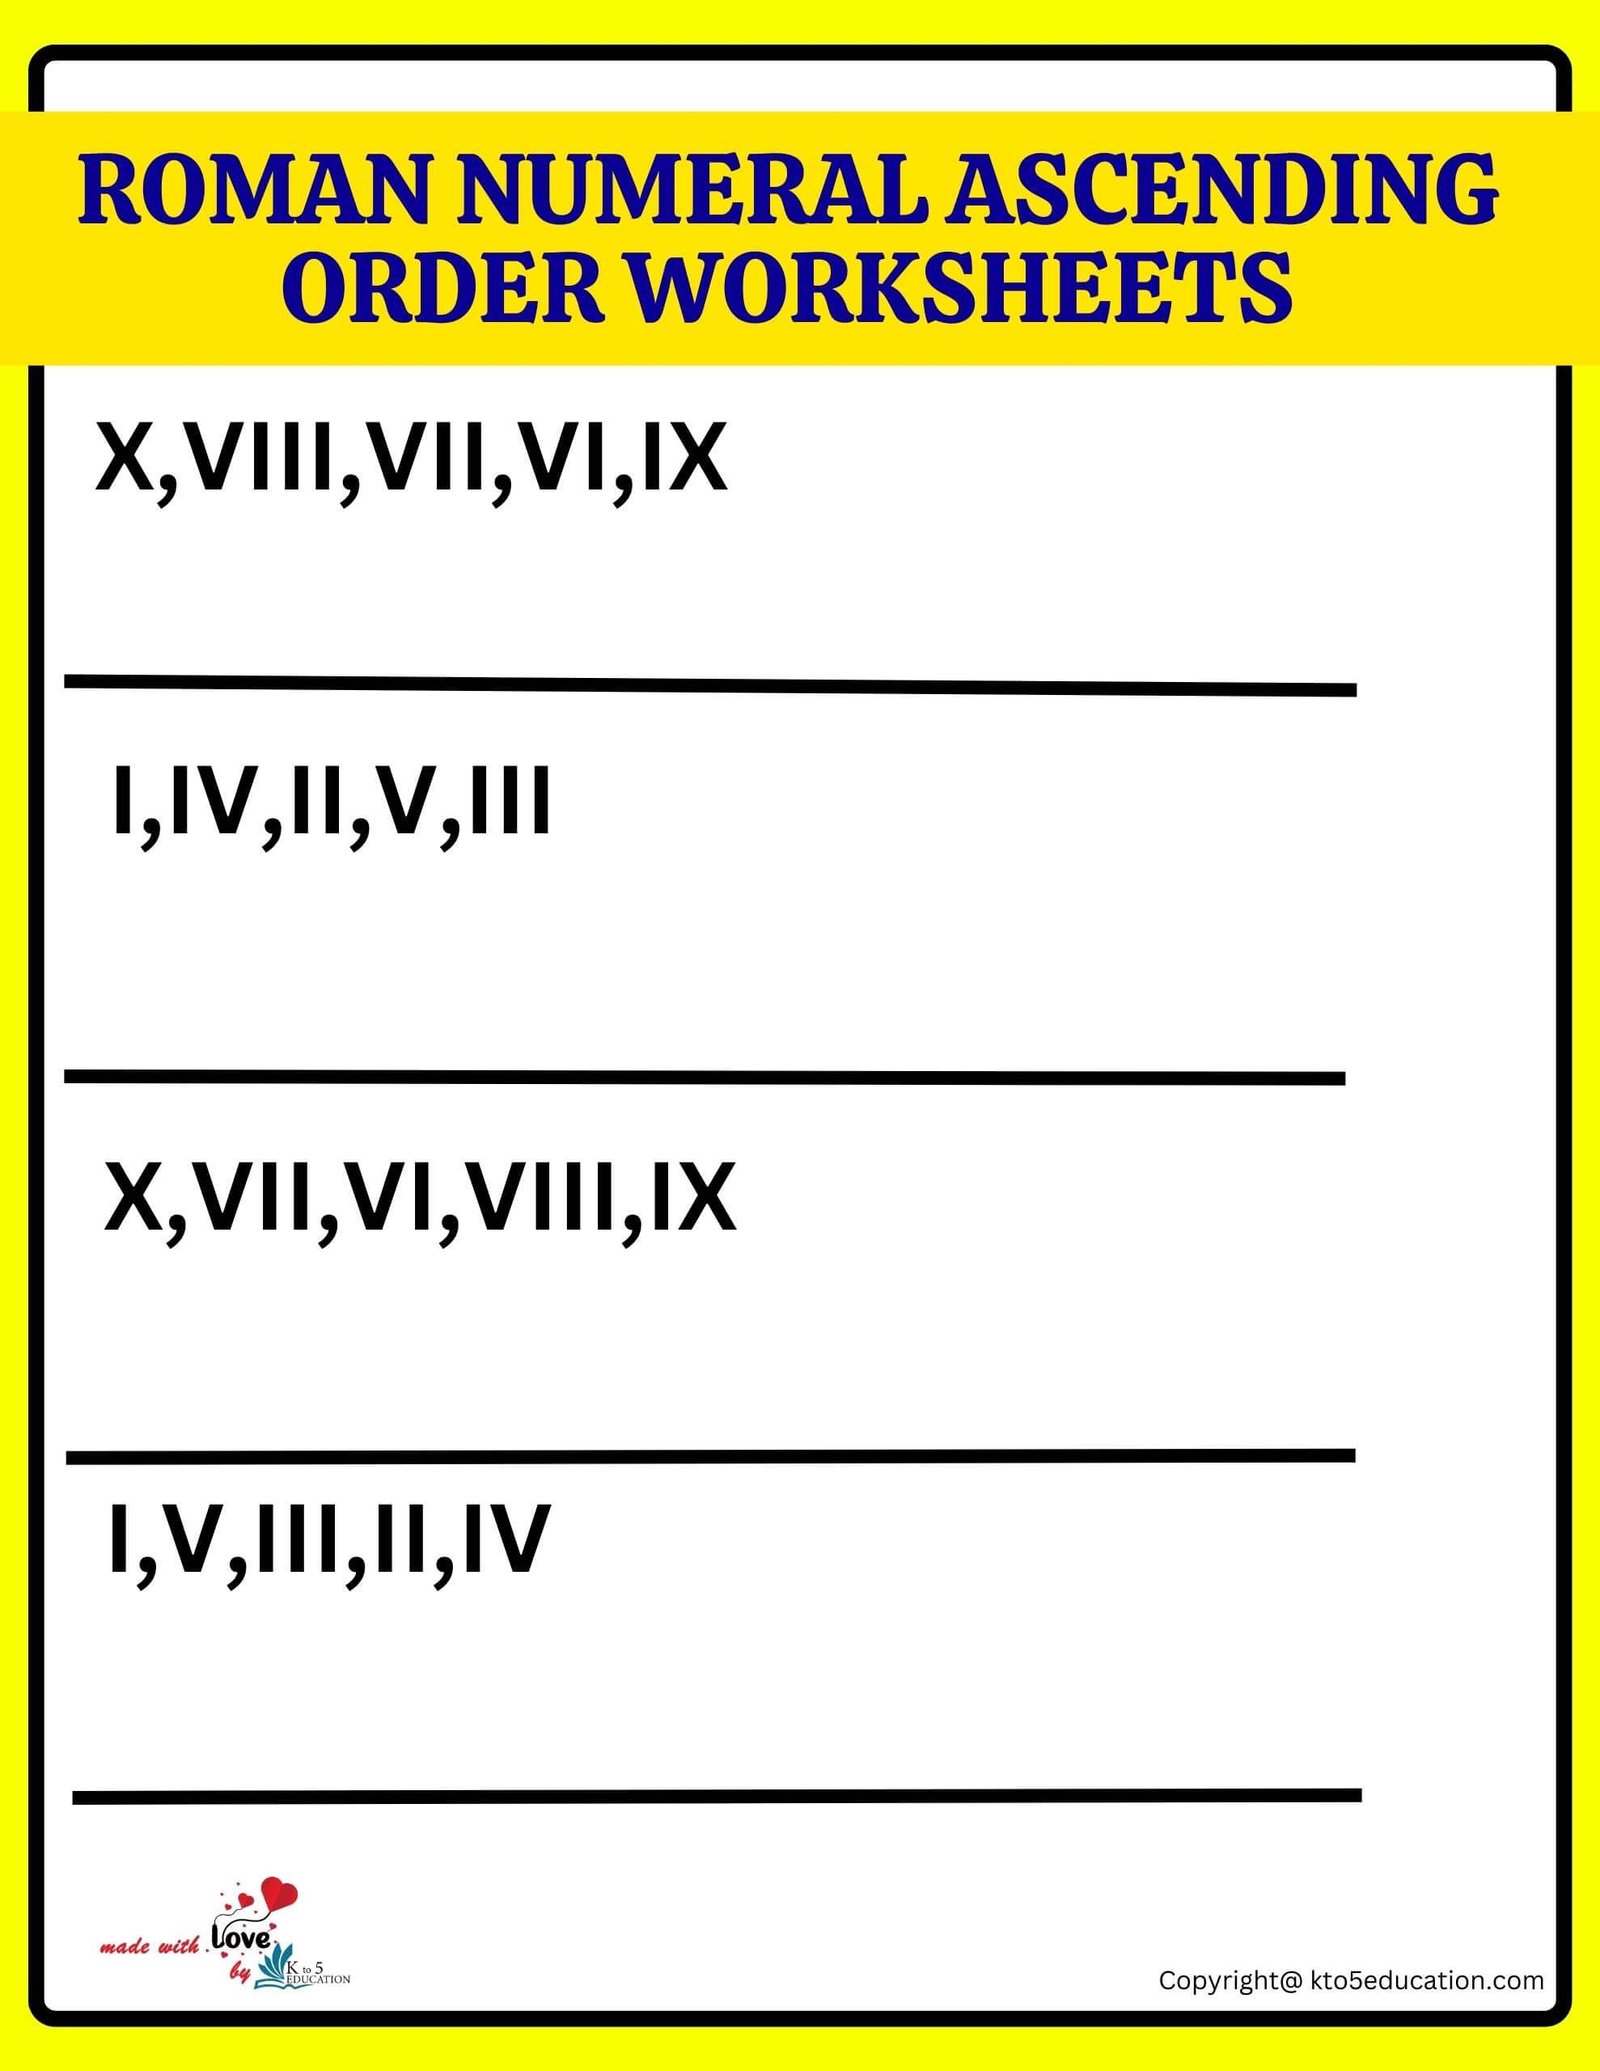 Roman Numeral Ascending Ordering Worksheets Grade 6 1 to 10